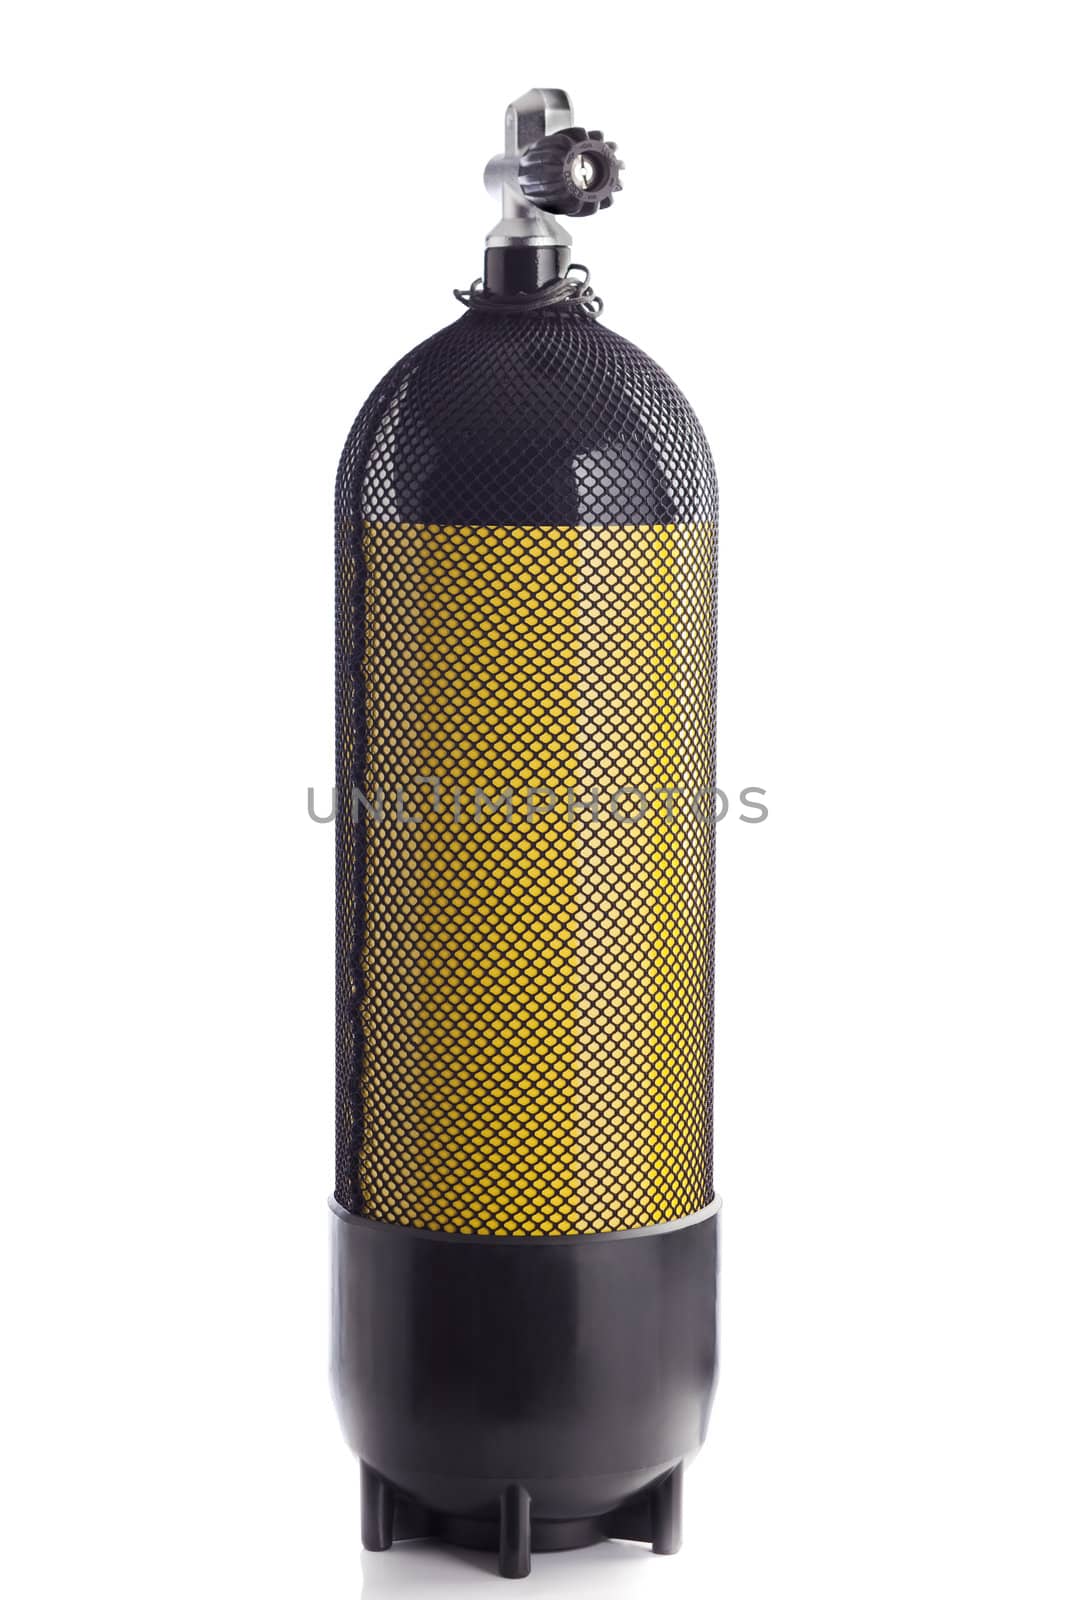 Scuba diving air tank over white background